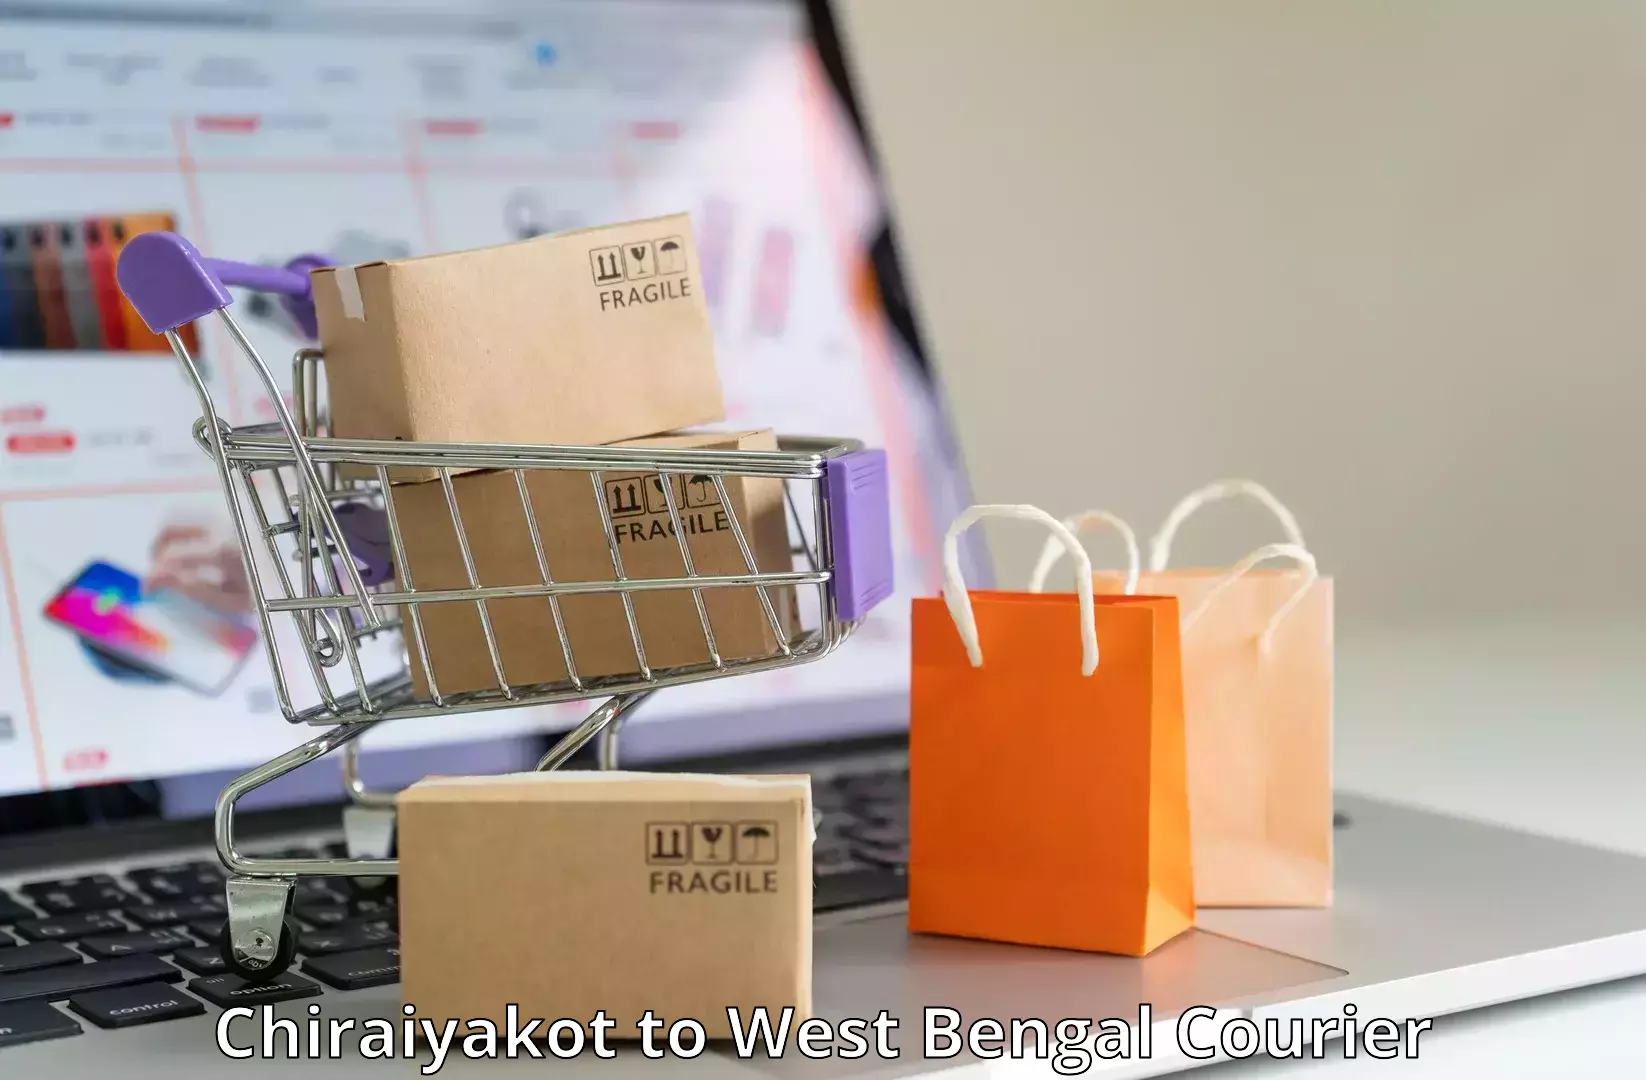 Courier service comparison in Chiraiyakot to West Bengal